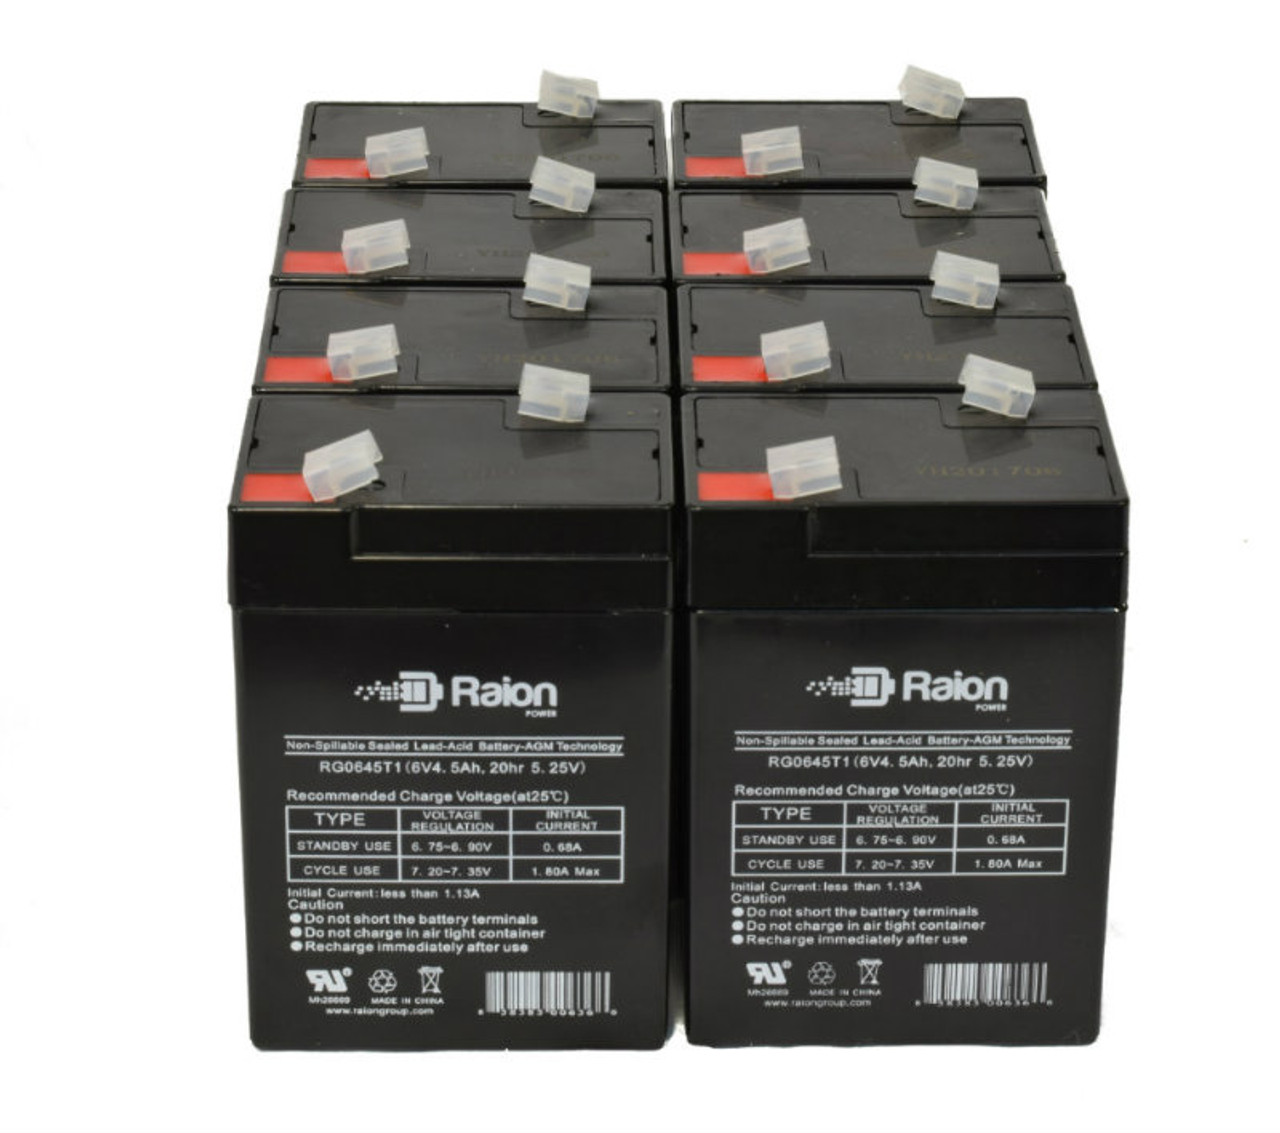 Raion Power 6 Volt 4.5Ah RG0645T1 Replacement Battery for XYC XT655 - 8 Pack